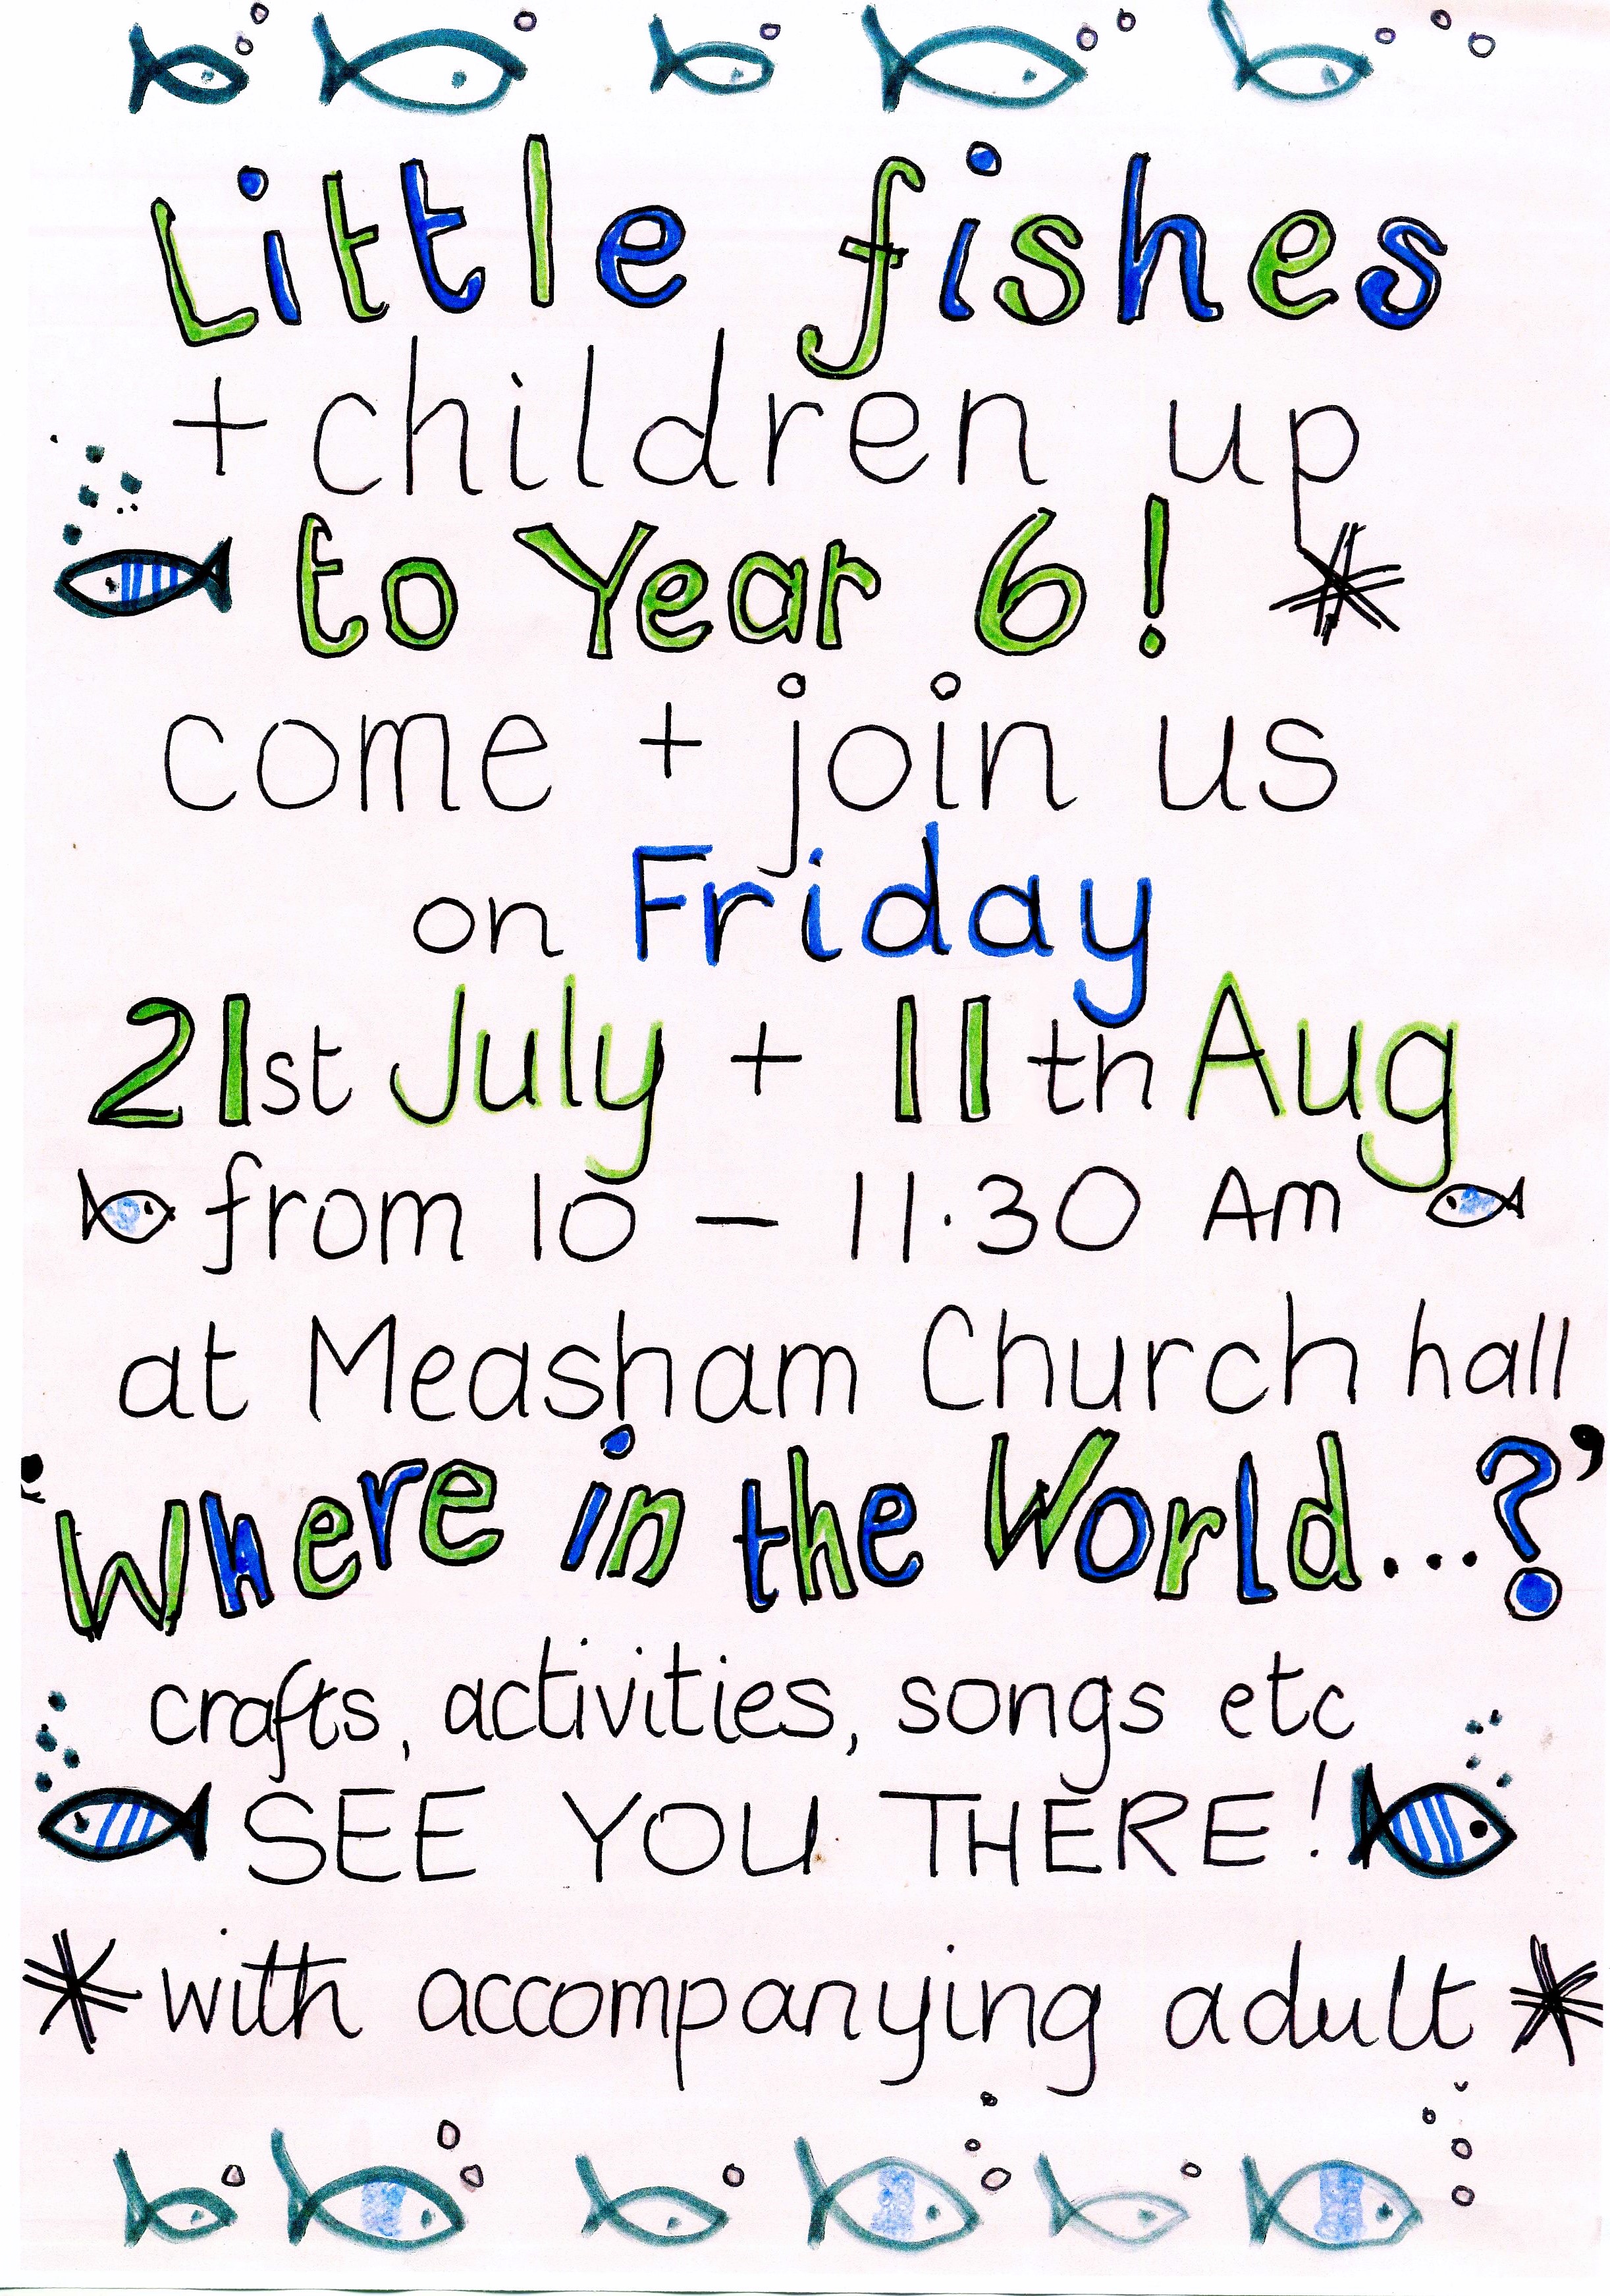 poster to promote a children's activity